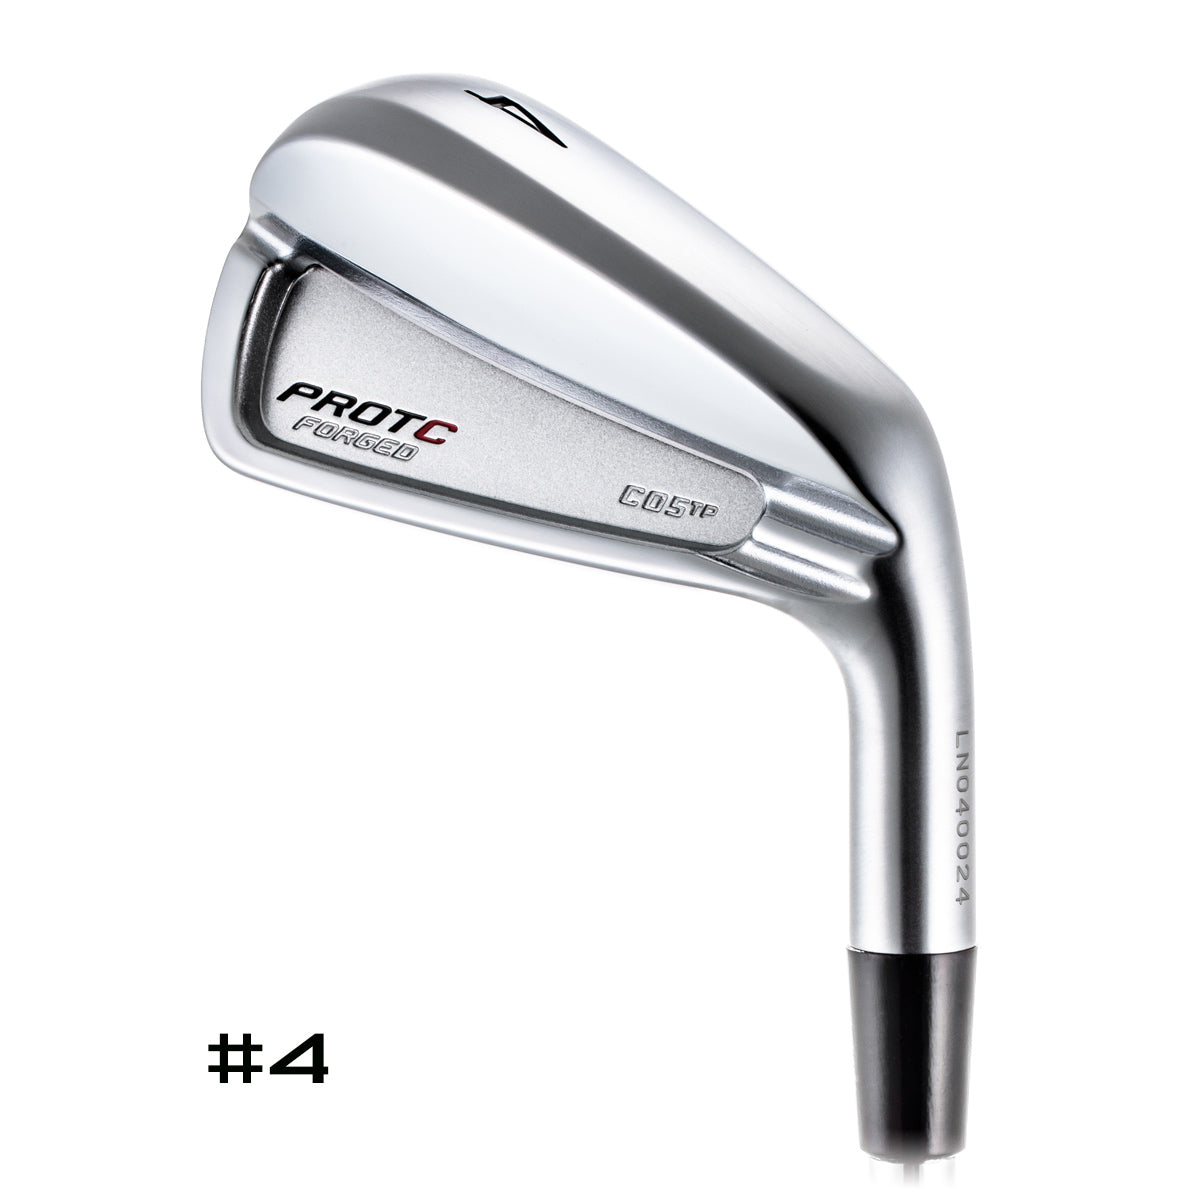 PROTOCONCEPT Golf, C05TP FORGED IRON -1